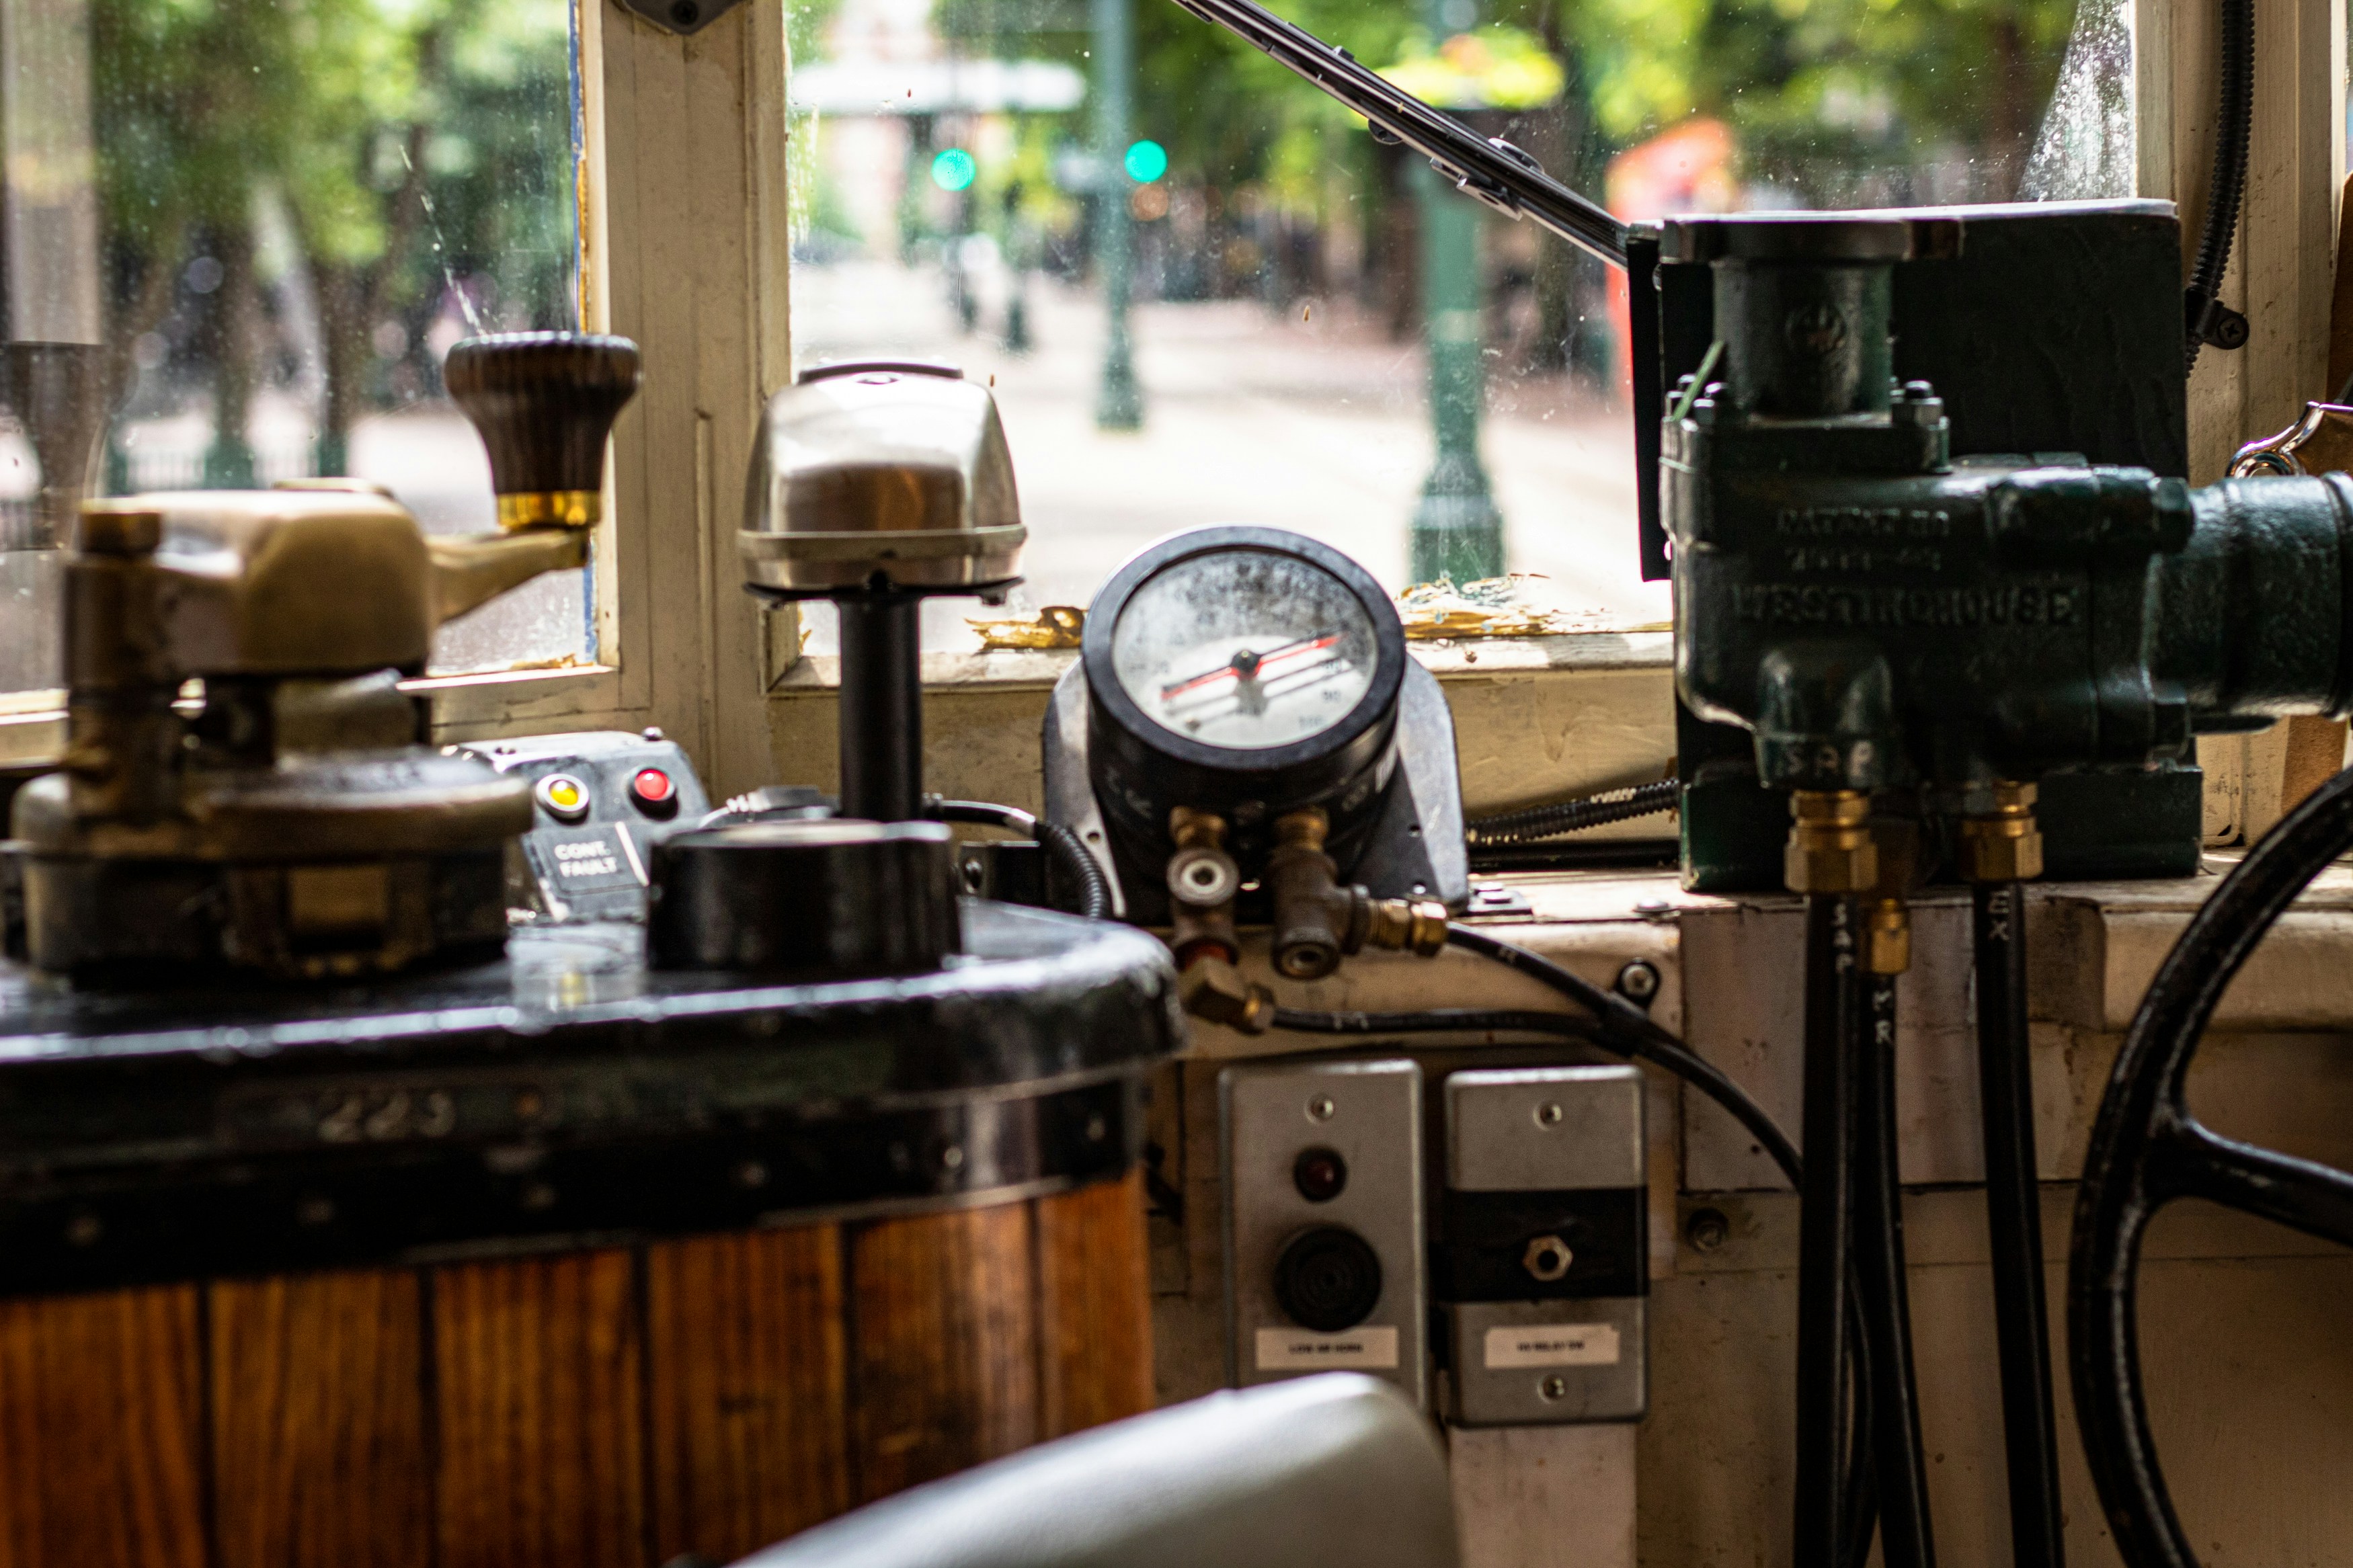 The controls of an electric trolley in downtown Memphis, TN.